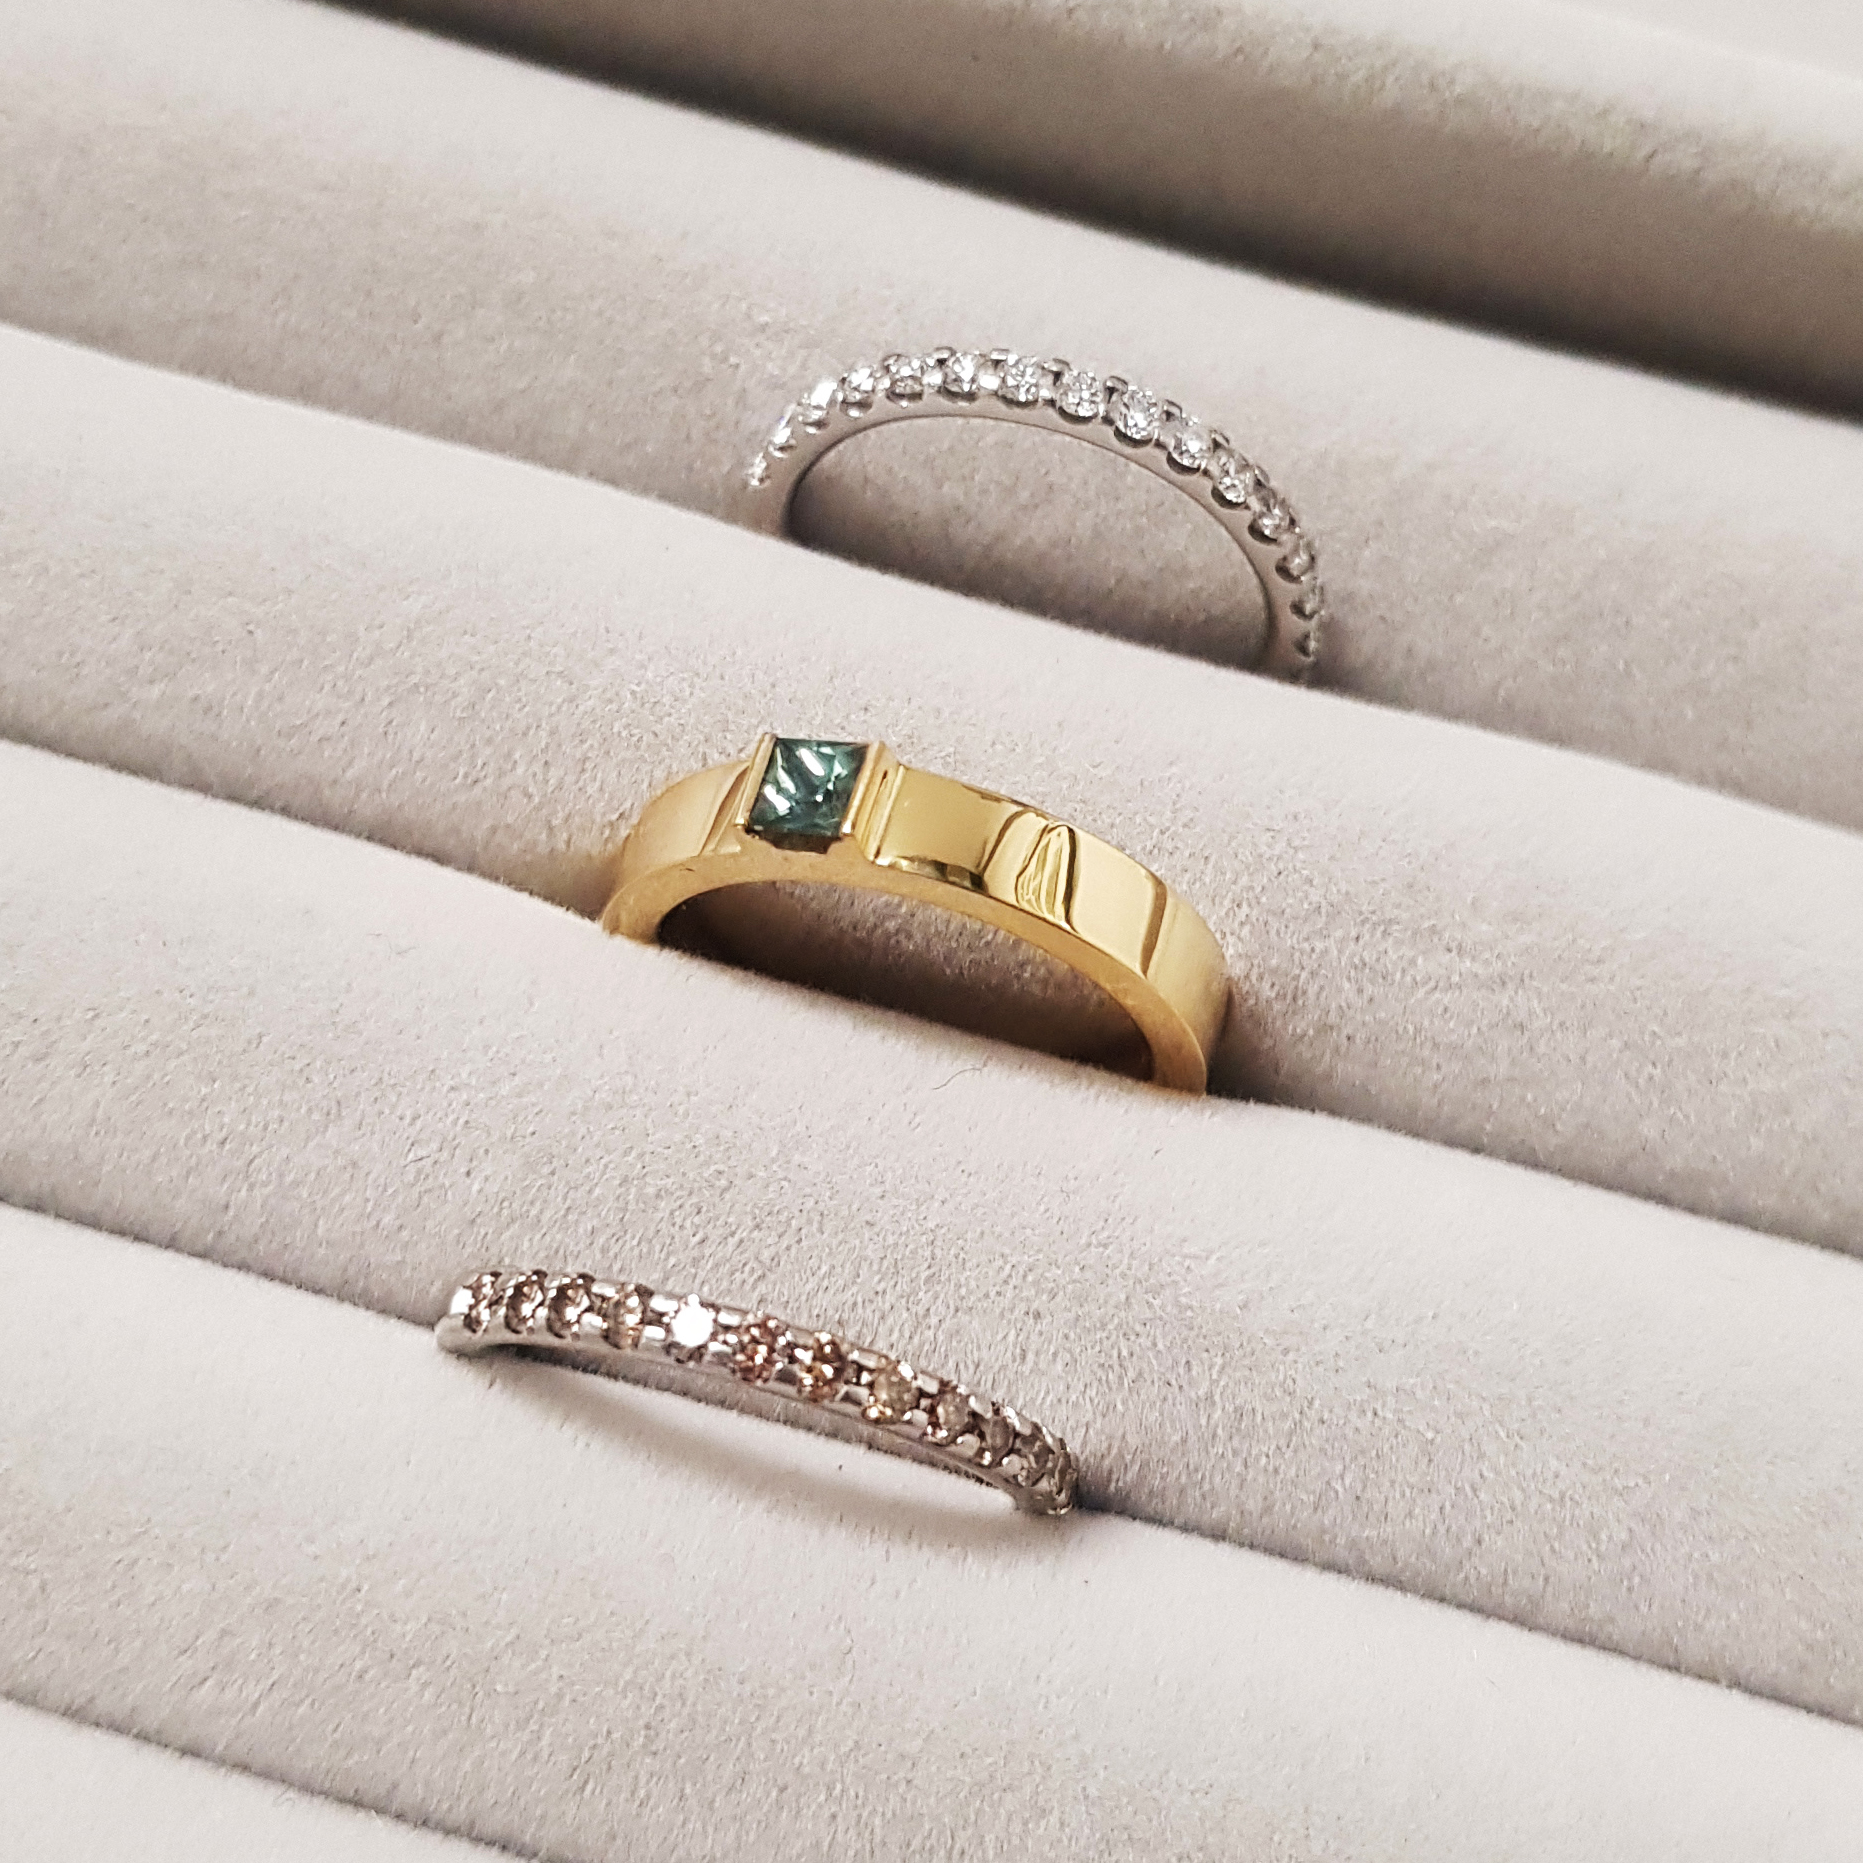 Two diamond eternity rings with an emerald and gold ring held in a row on a grey fabric display pad